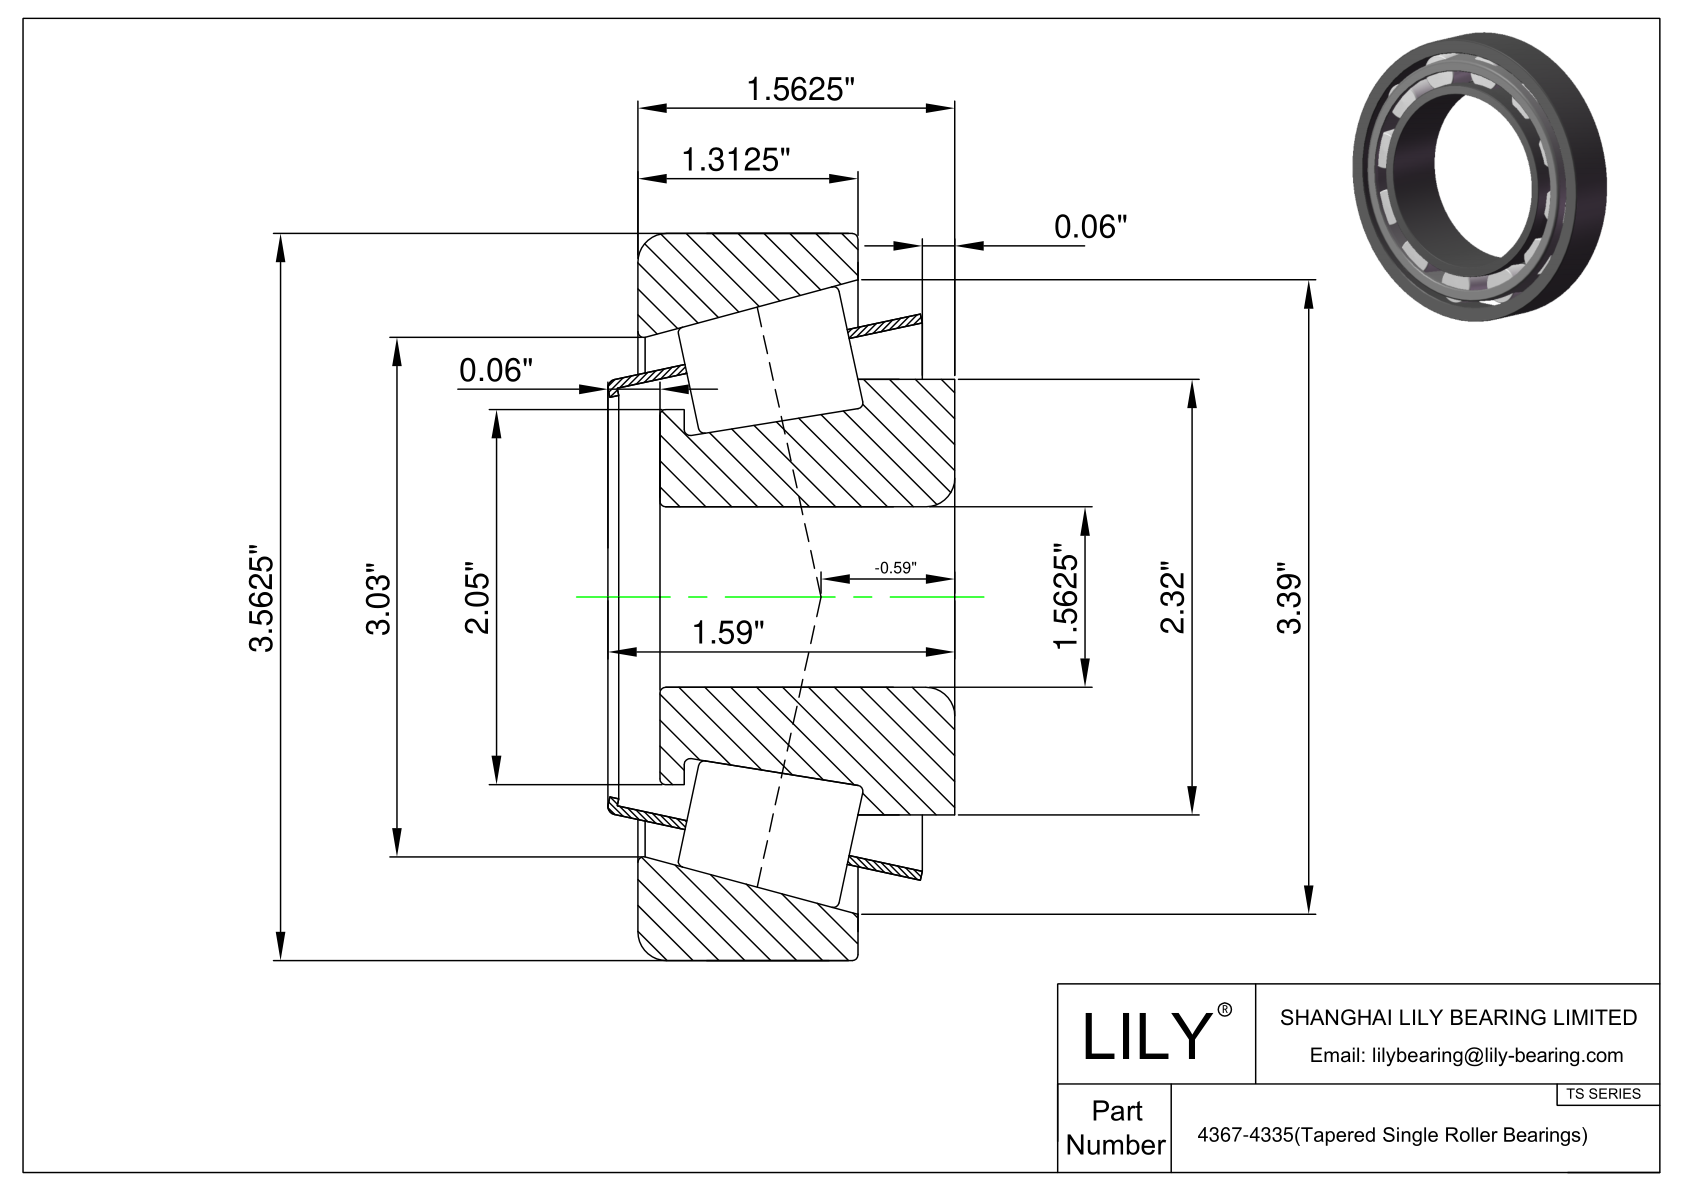 4367-4335 TS (Tapered Single Roller Bearings) (Imperial) cad drawing